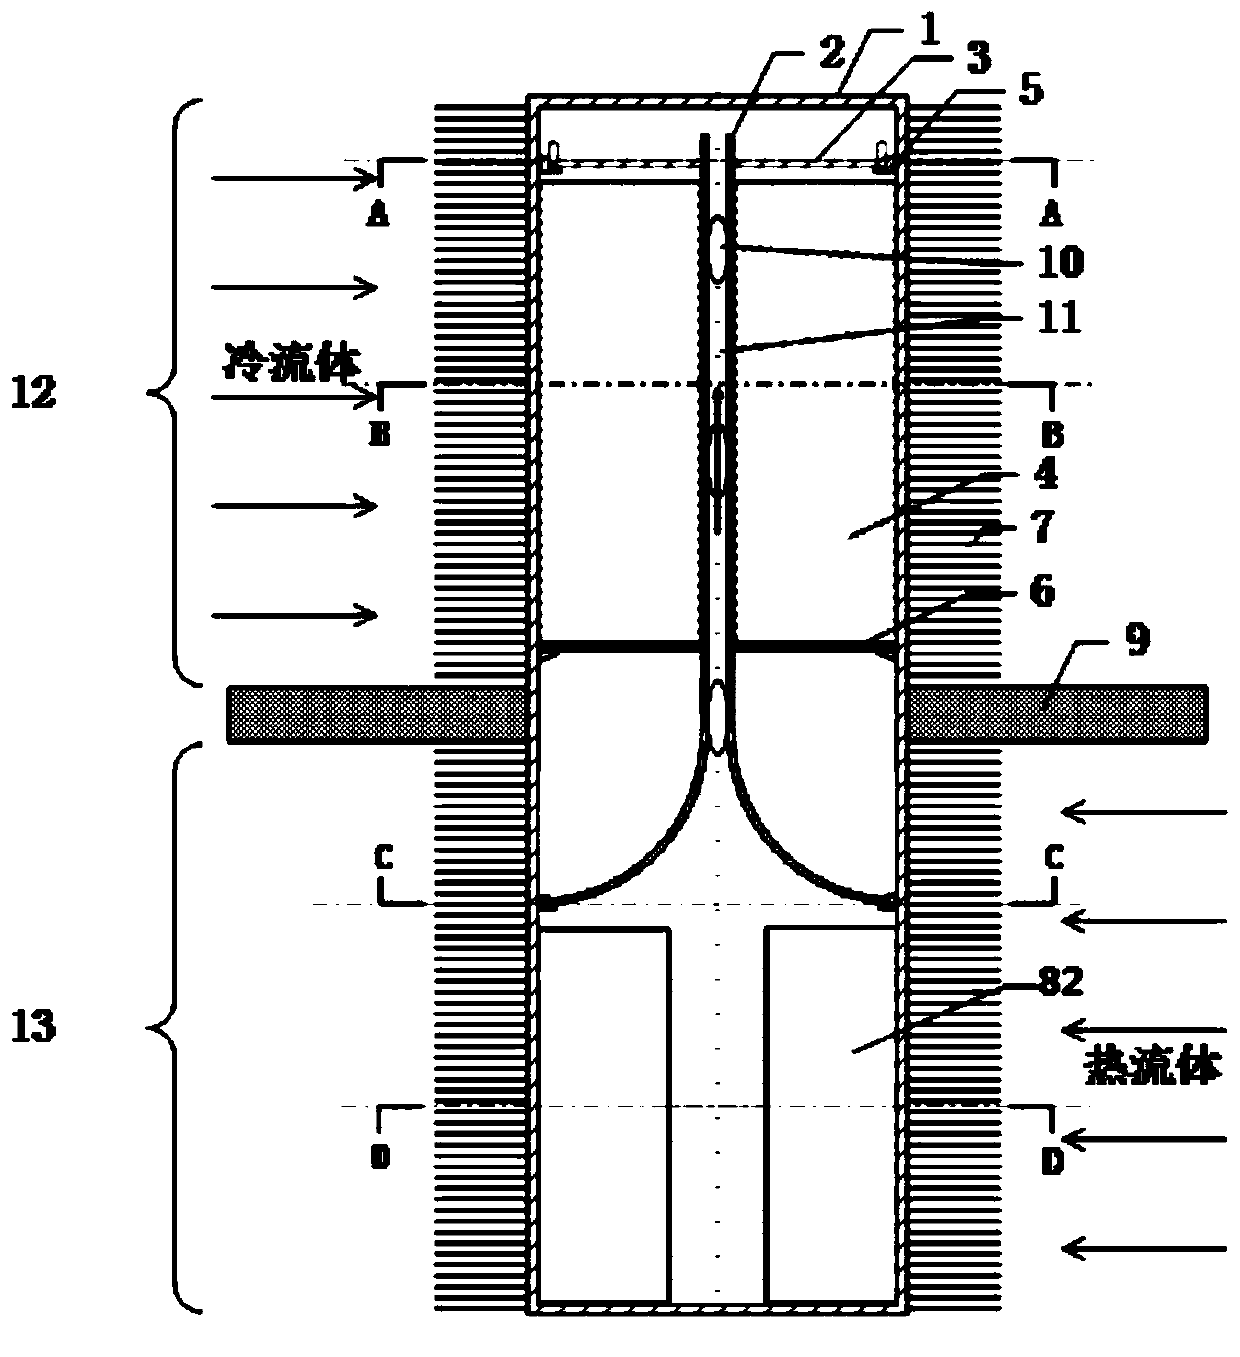 Chemical heat pipe based on reversible chemical reaction and physicochemical heat effect and heat transfer method